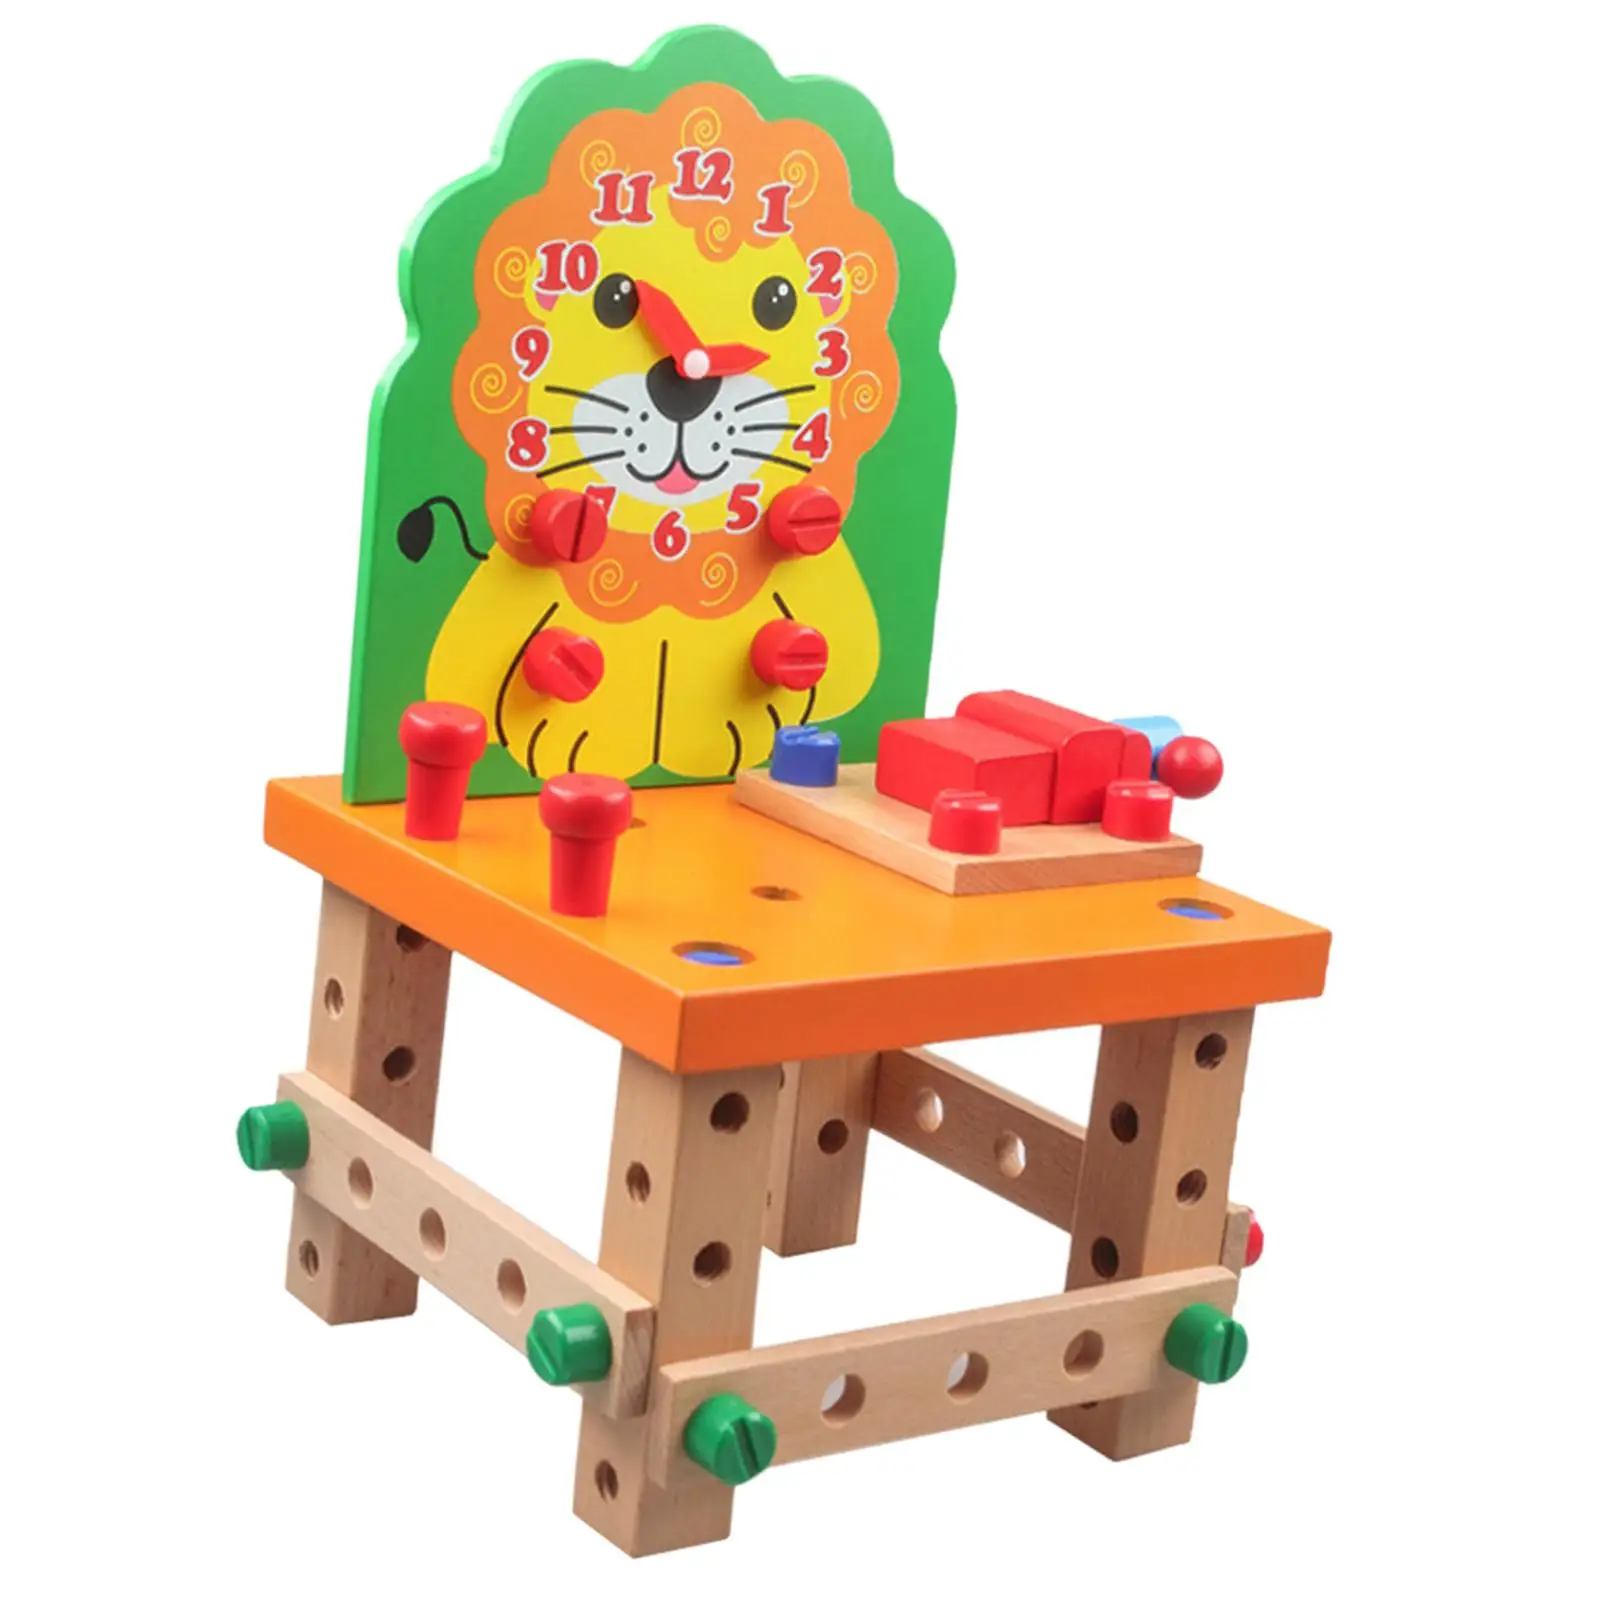 Wooden Chair Models Construction Play Set with Tools Nuts and Bolts Kids Wooden Project Woodworking Kit for Girls Boys Gifts